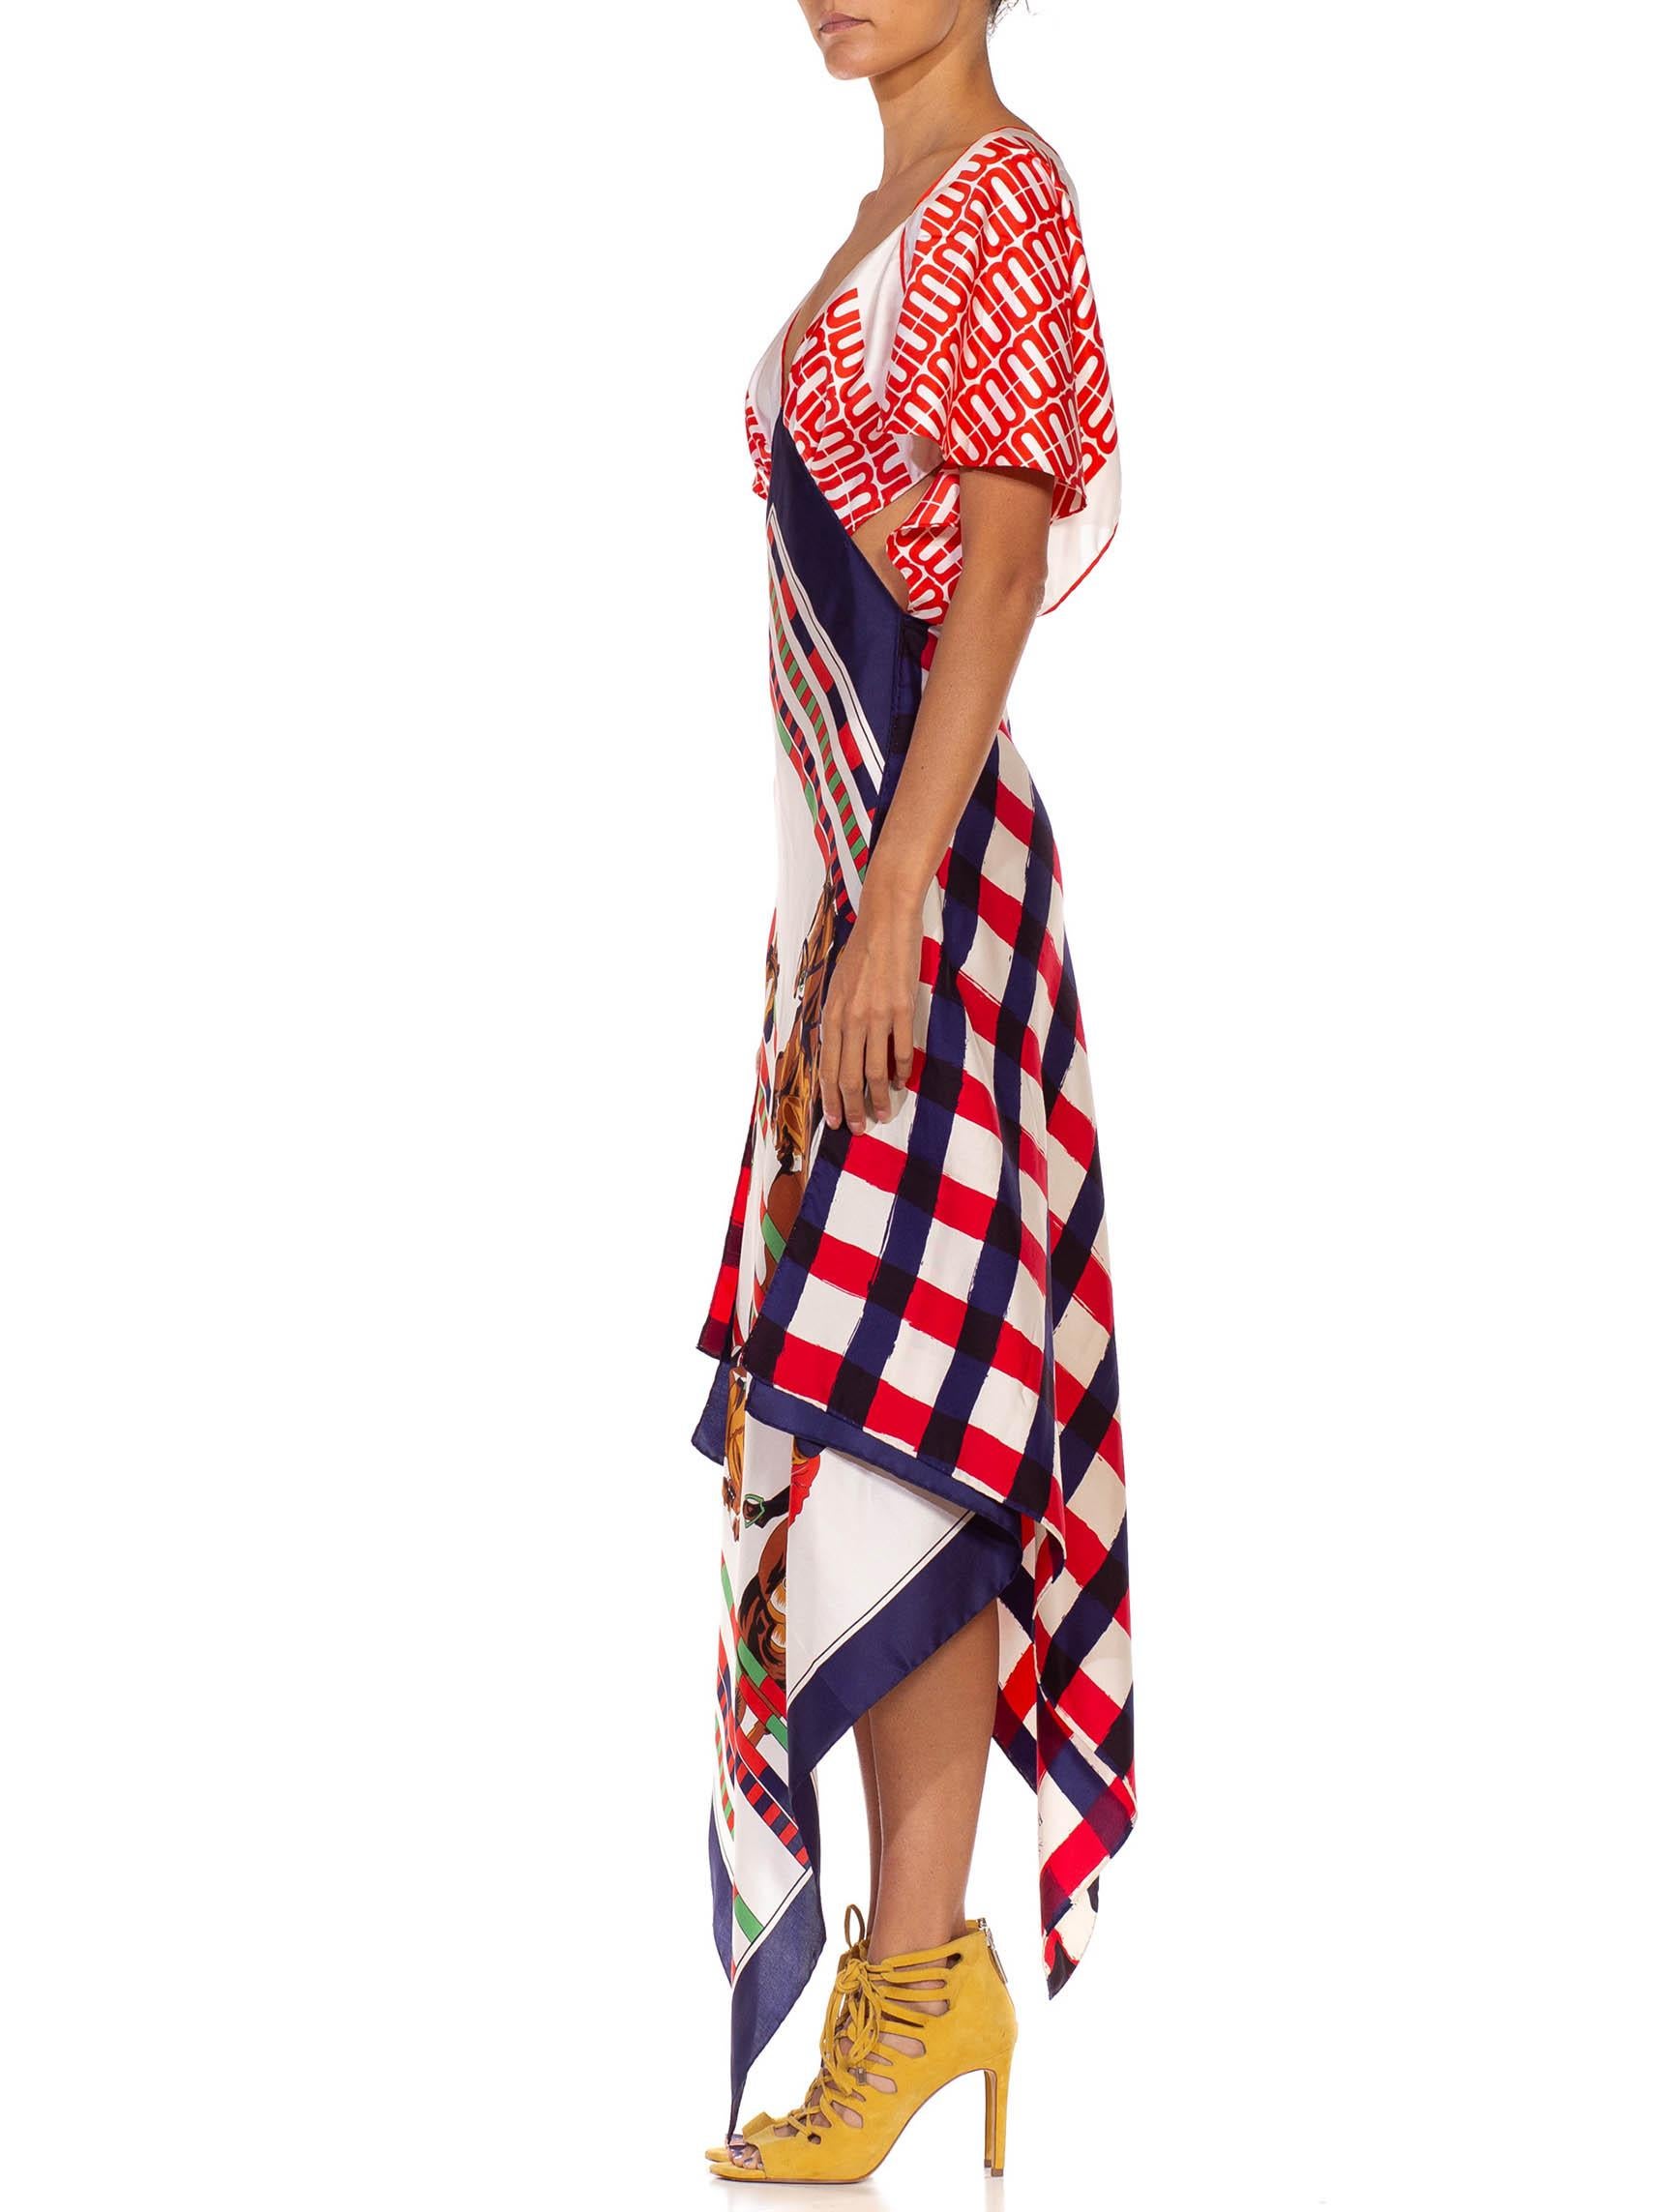 Red White & Blue Bias Cut Silk Twill Two-Scarf Equestrian Print Dress
MORPHEW COLLECTION is made entirely by hand in our NYC Ateliér of rare antique materials sourced from around the globe. Our sustainable vintage materials represent over a century